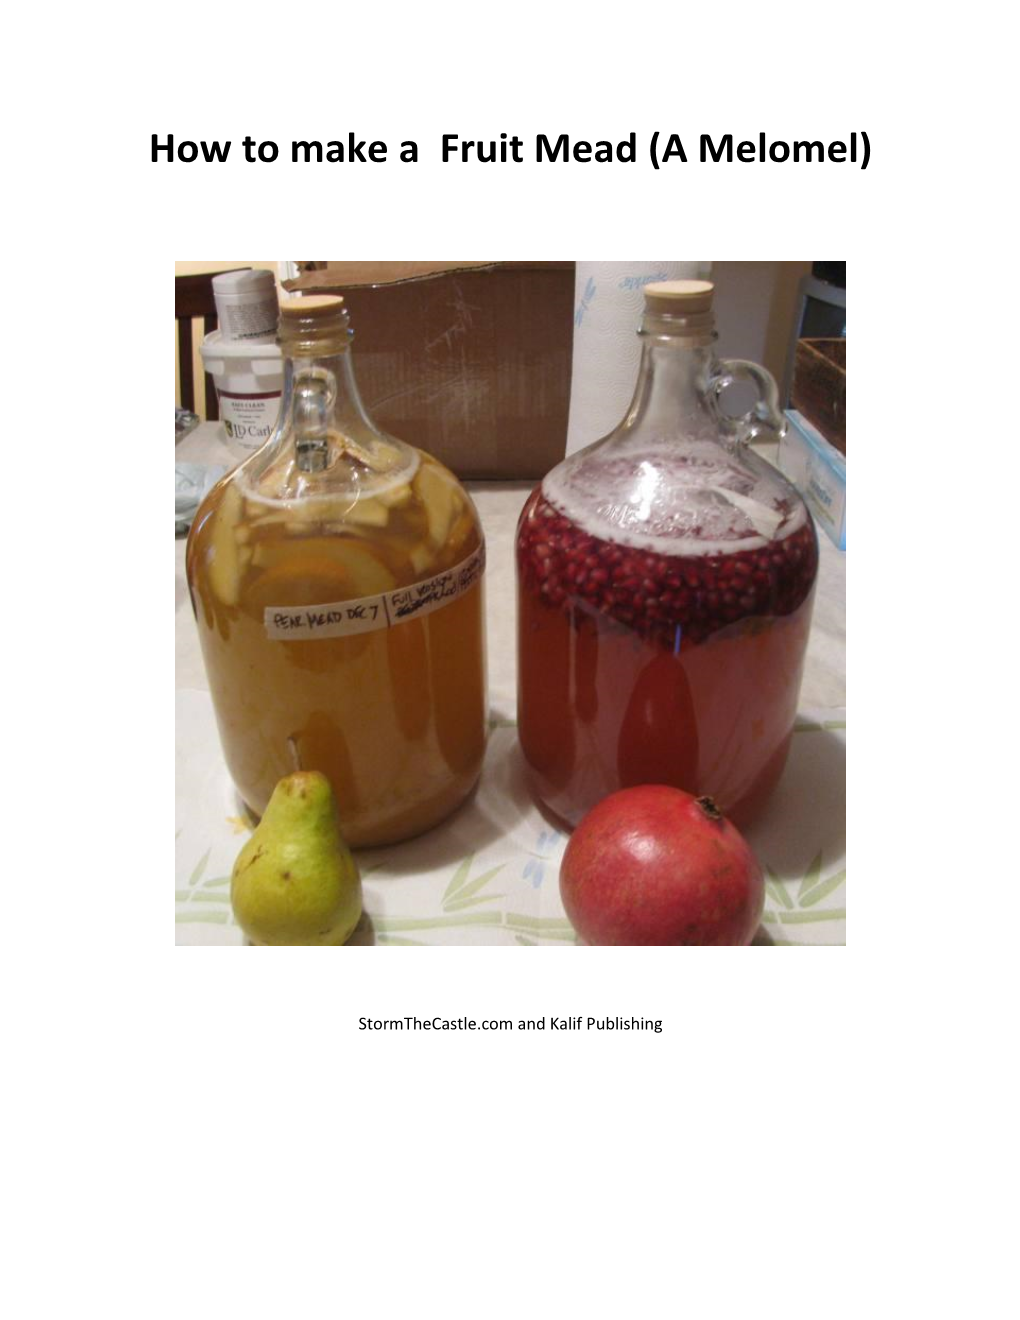 How to Make a Fruit Mead (A Melomel)